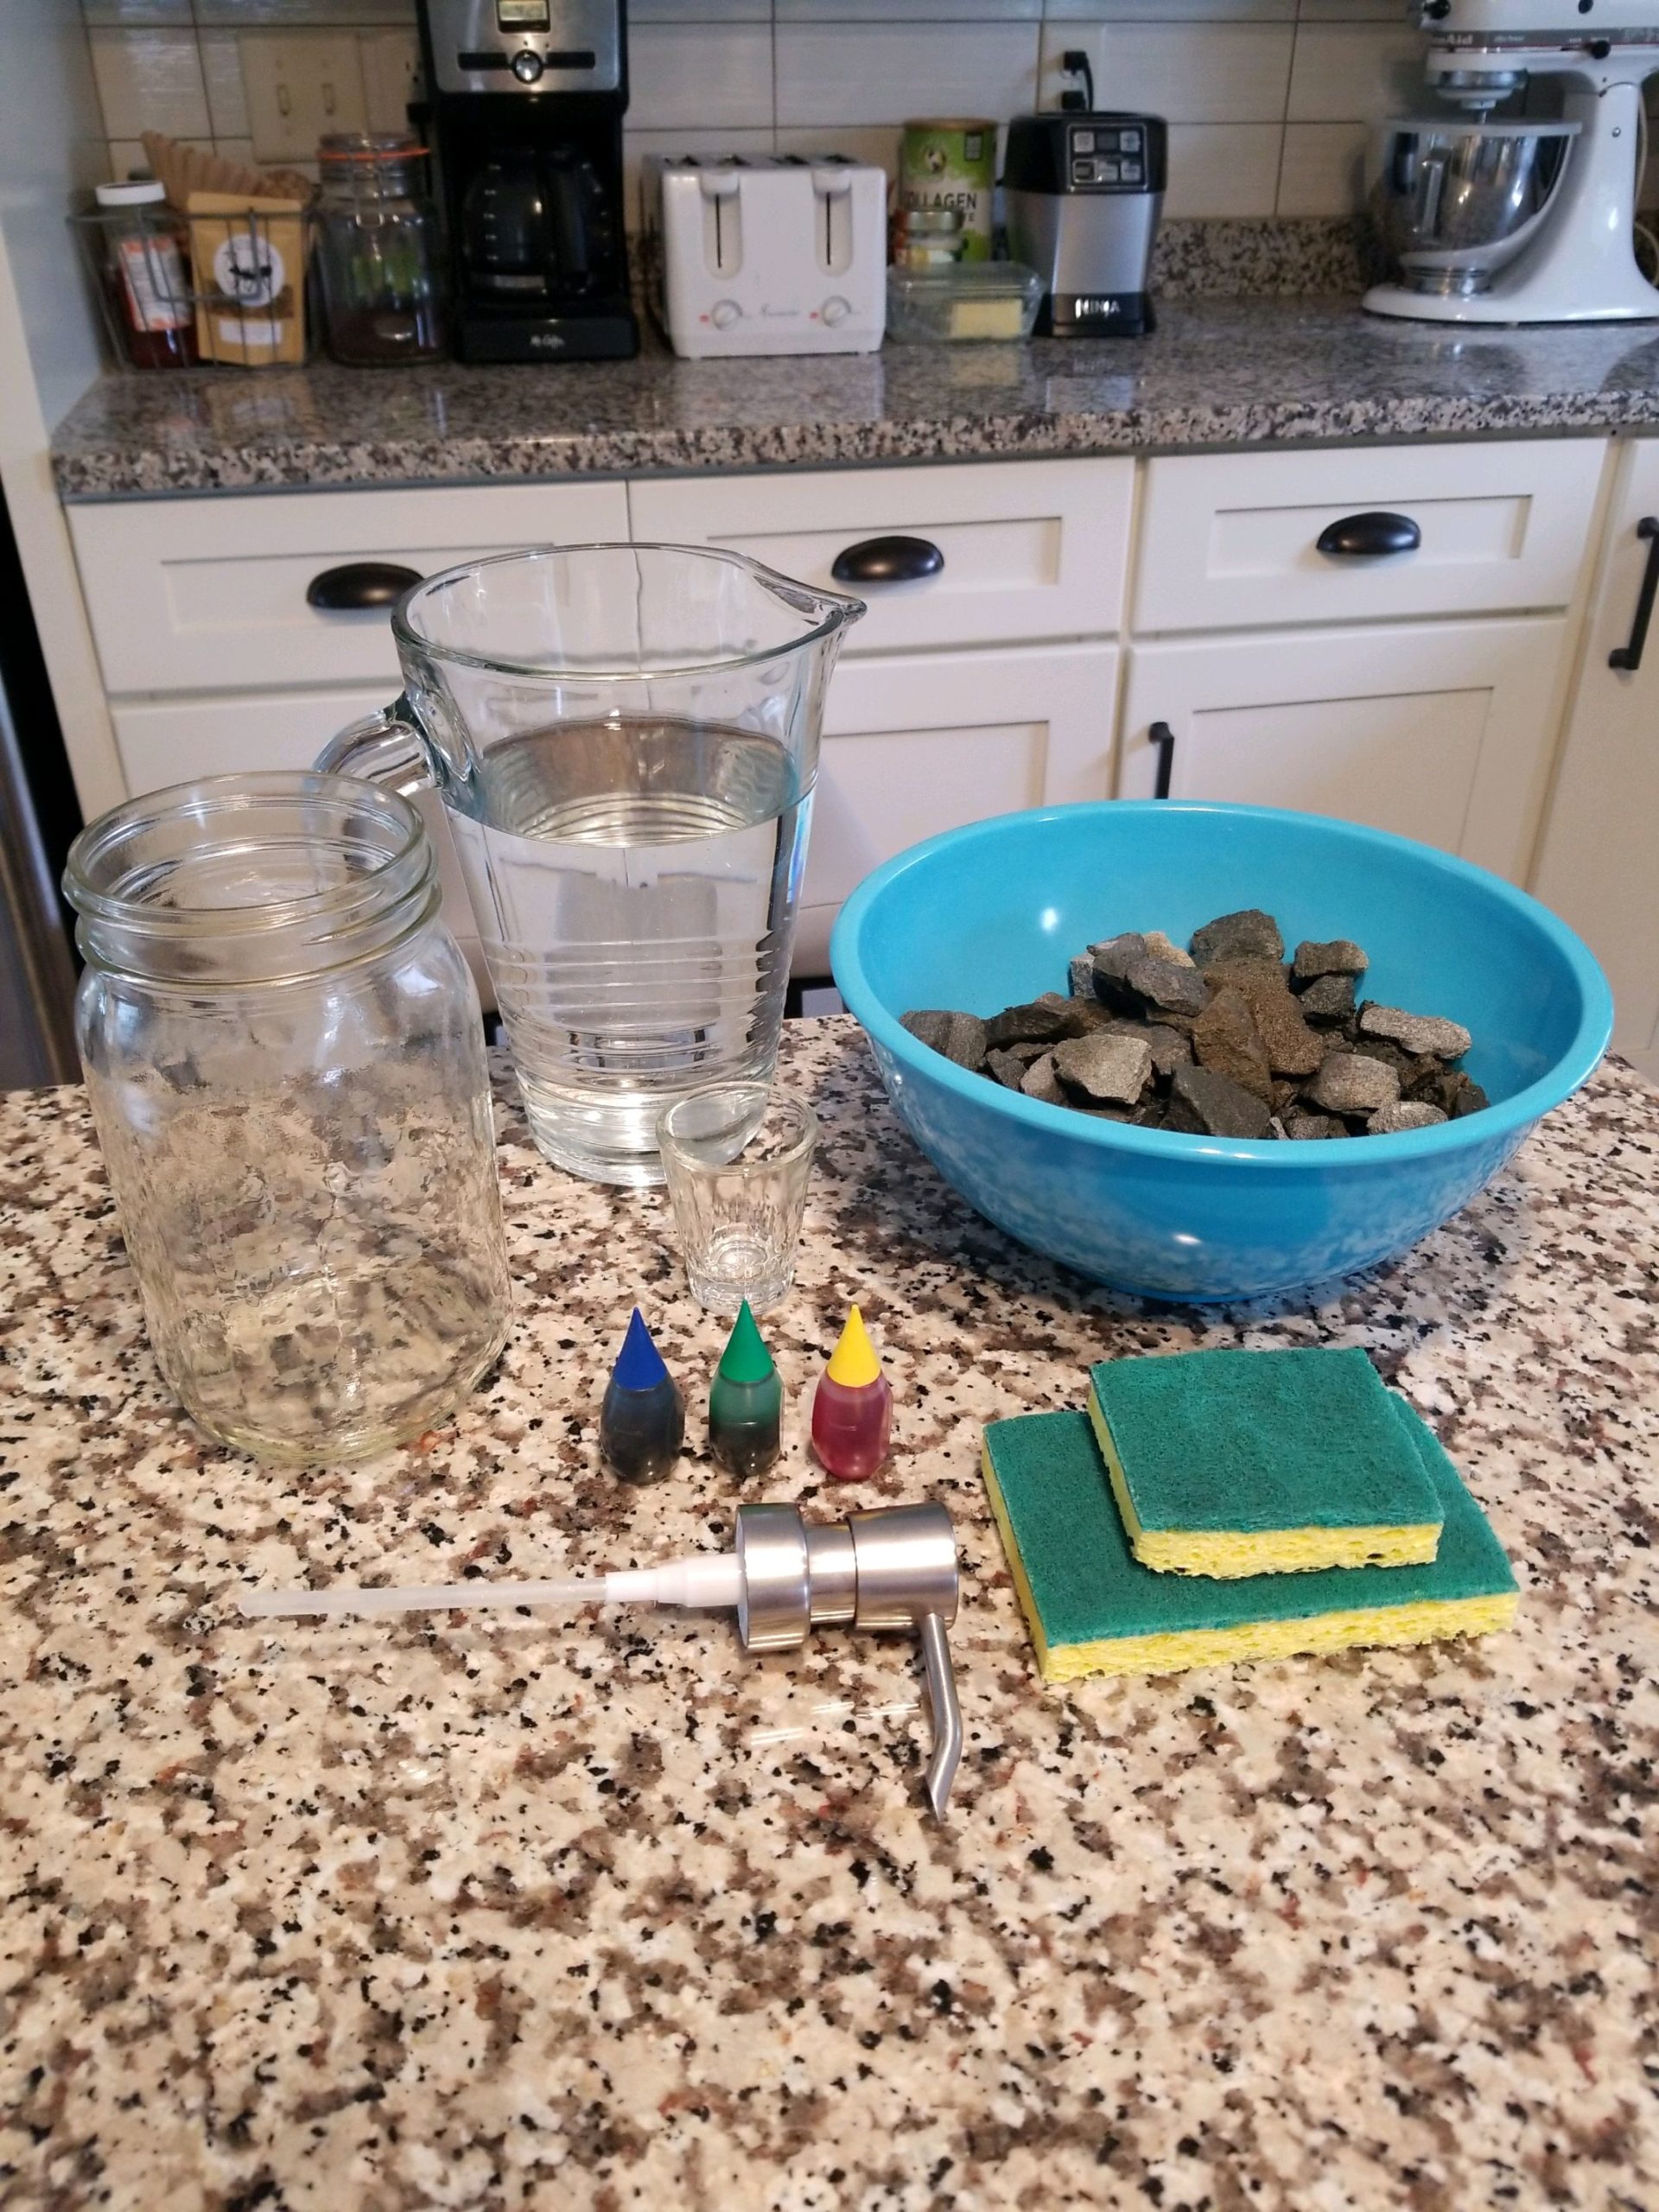 The supplies needed for an at-home groundwater model set on a counter, including a bowl of rocks, two sponges, three colors of food dye, a pitcher of water, a glass jar, and a hand soap dispenser